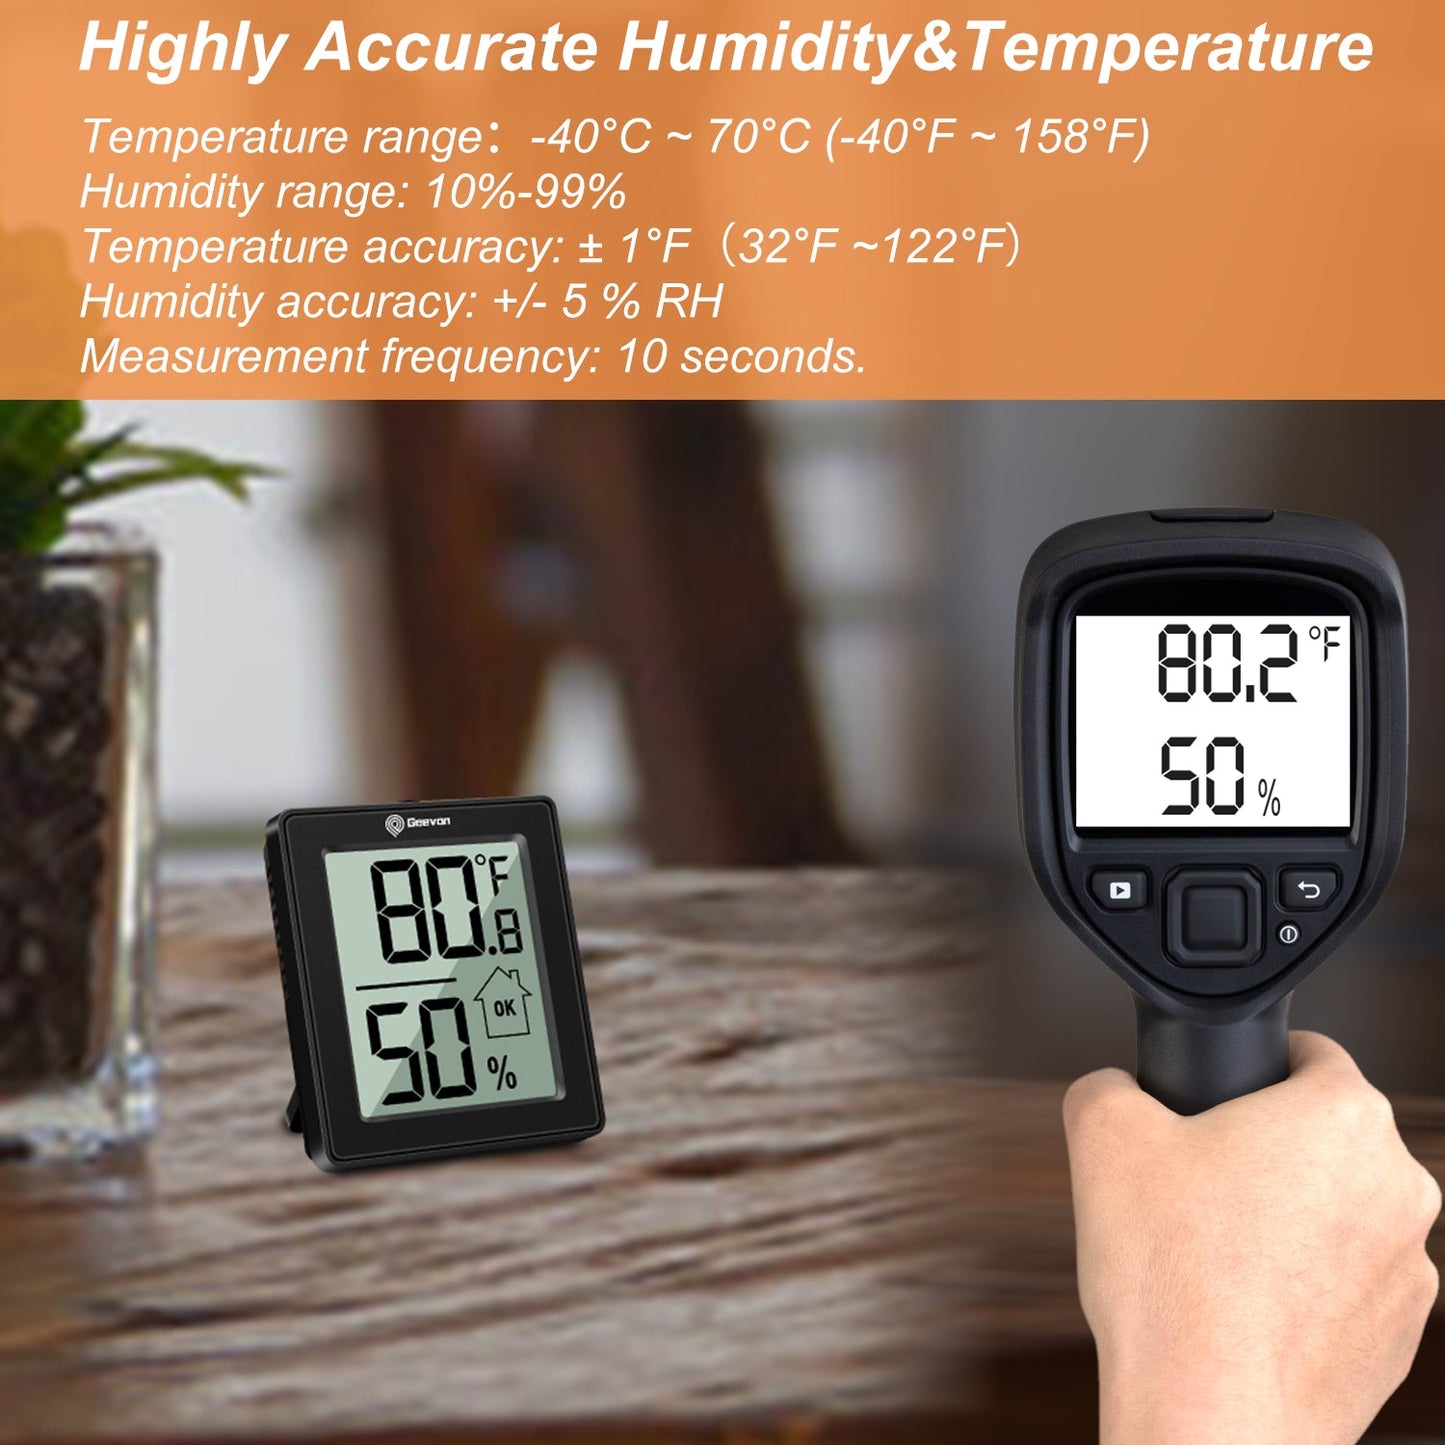 Geevon Hygrometer Indoor Thermometer Room Humidity Gauge with Battery,Digital Temperature Gauge Humidity Meter Indicator for Home, Office, Greenhouse, Mini Hygrometer,Black 2pack